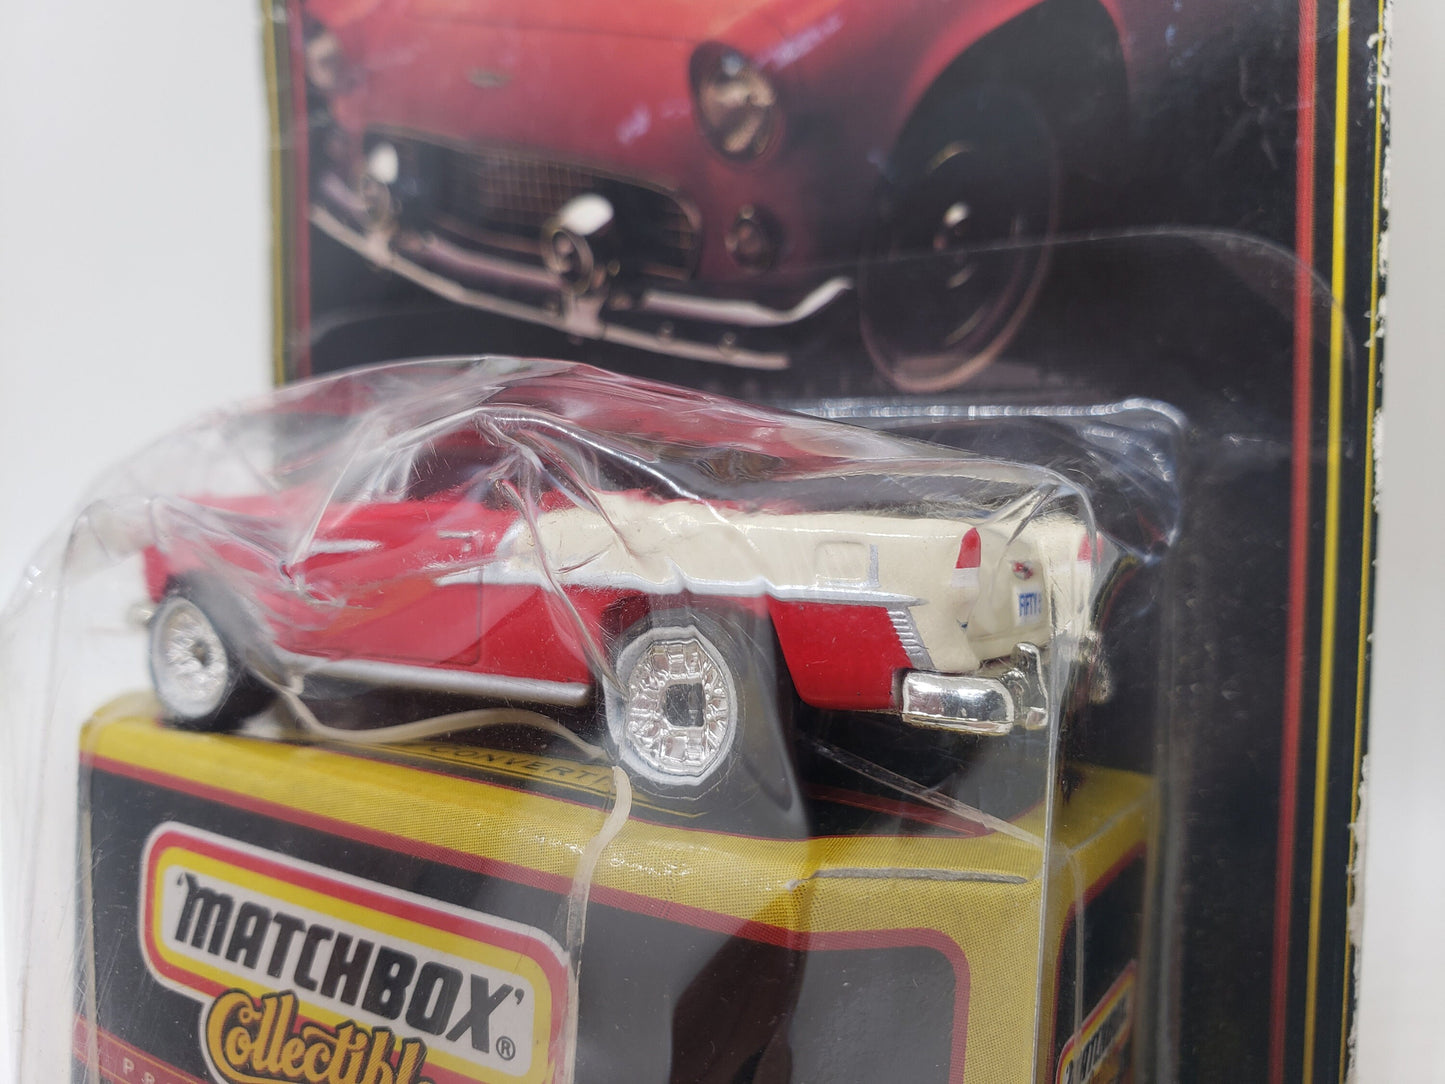 Matchbox '55 Chevy Convertible Red Premiere Nostalgia Miniature Collectible Scale Model Toy Car